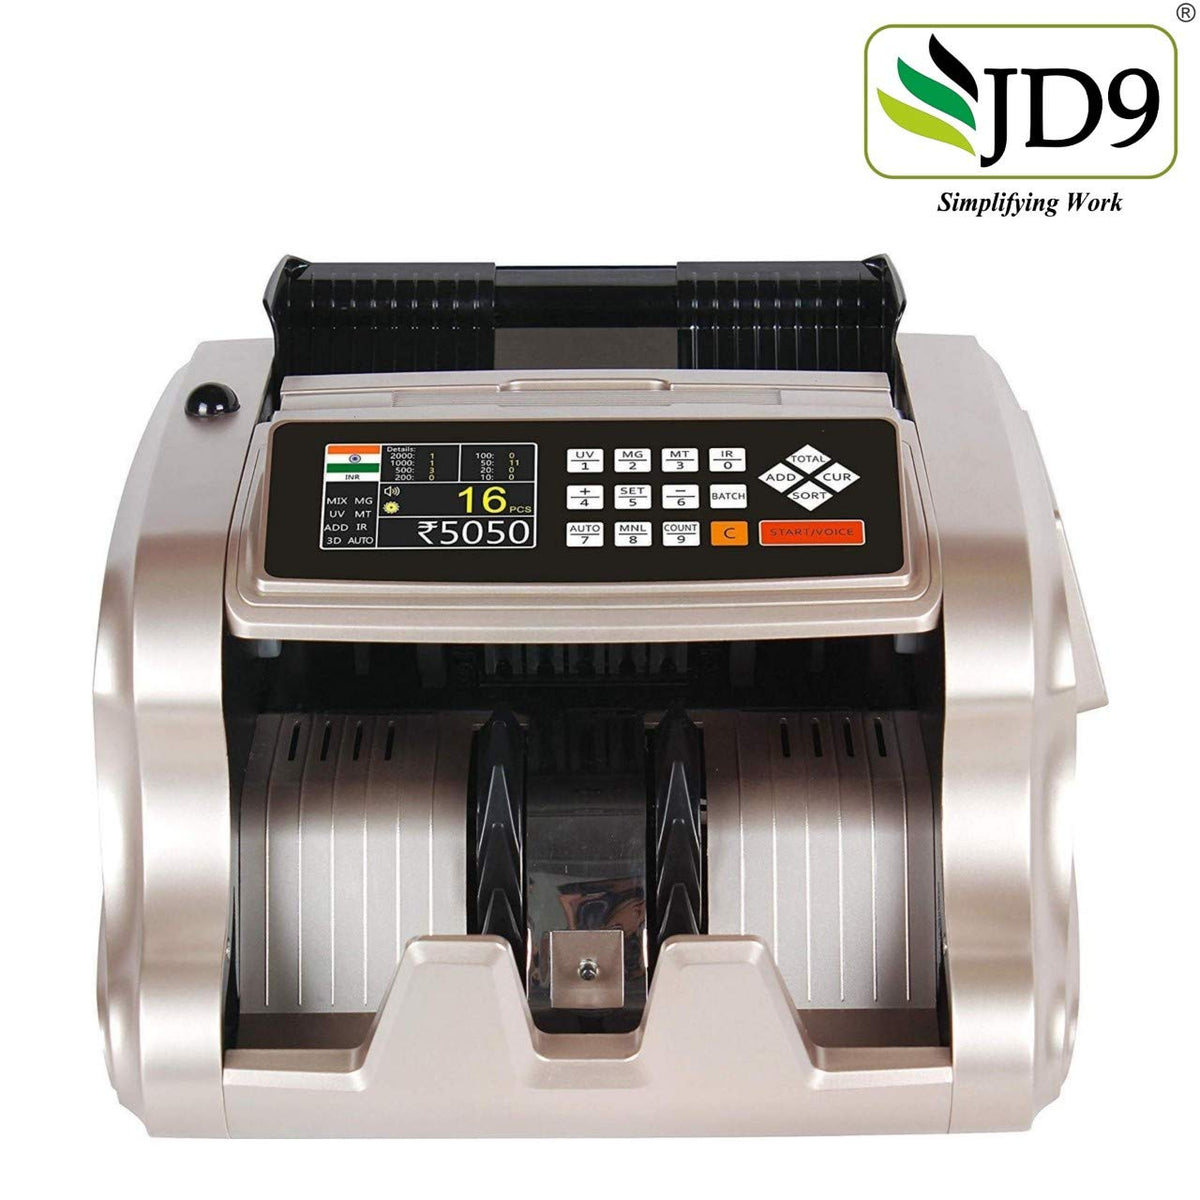 JD9 8888-E Mix Note Value Counting Business-Grade Machine Fully Automa